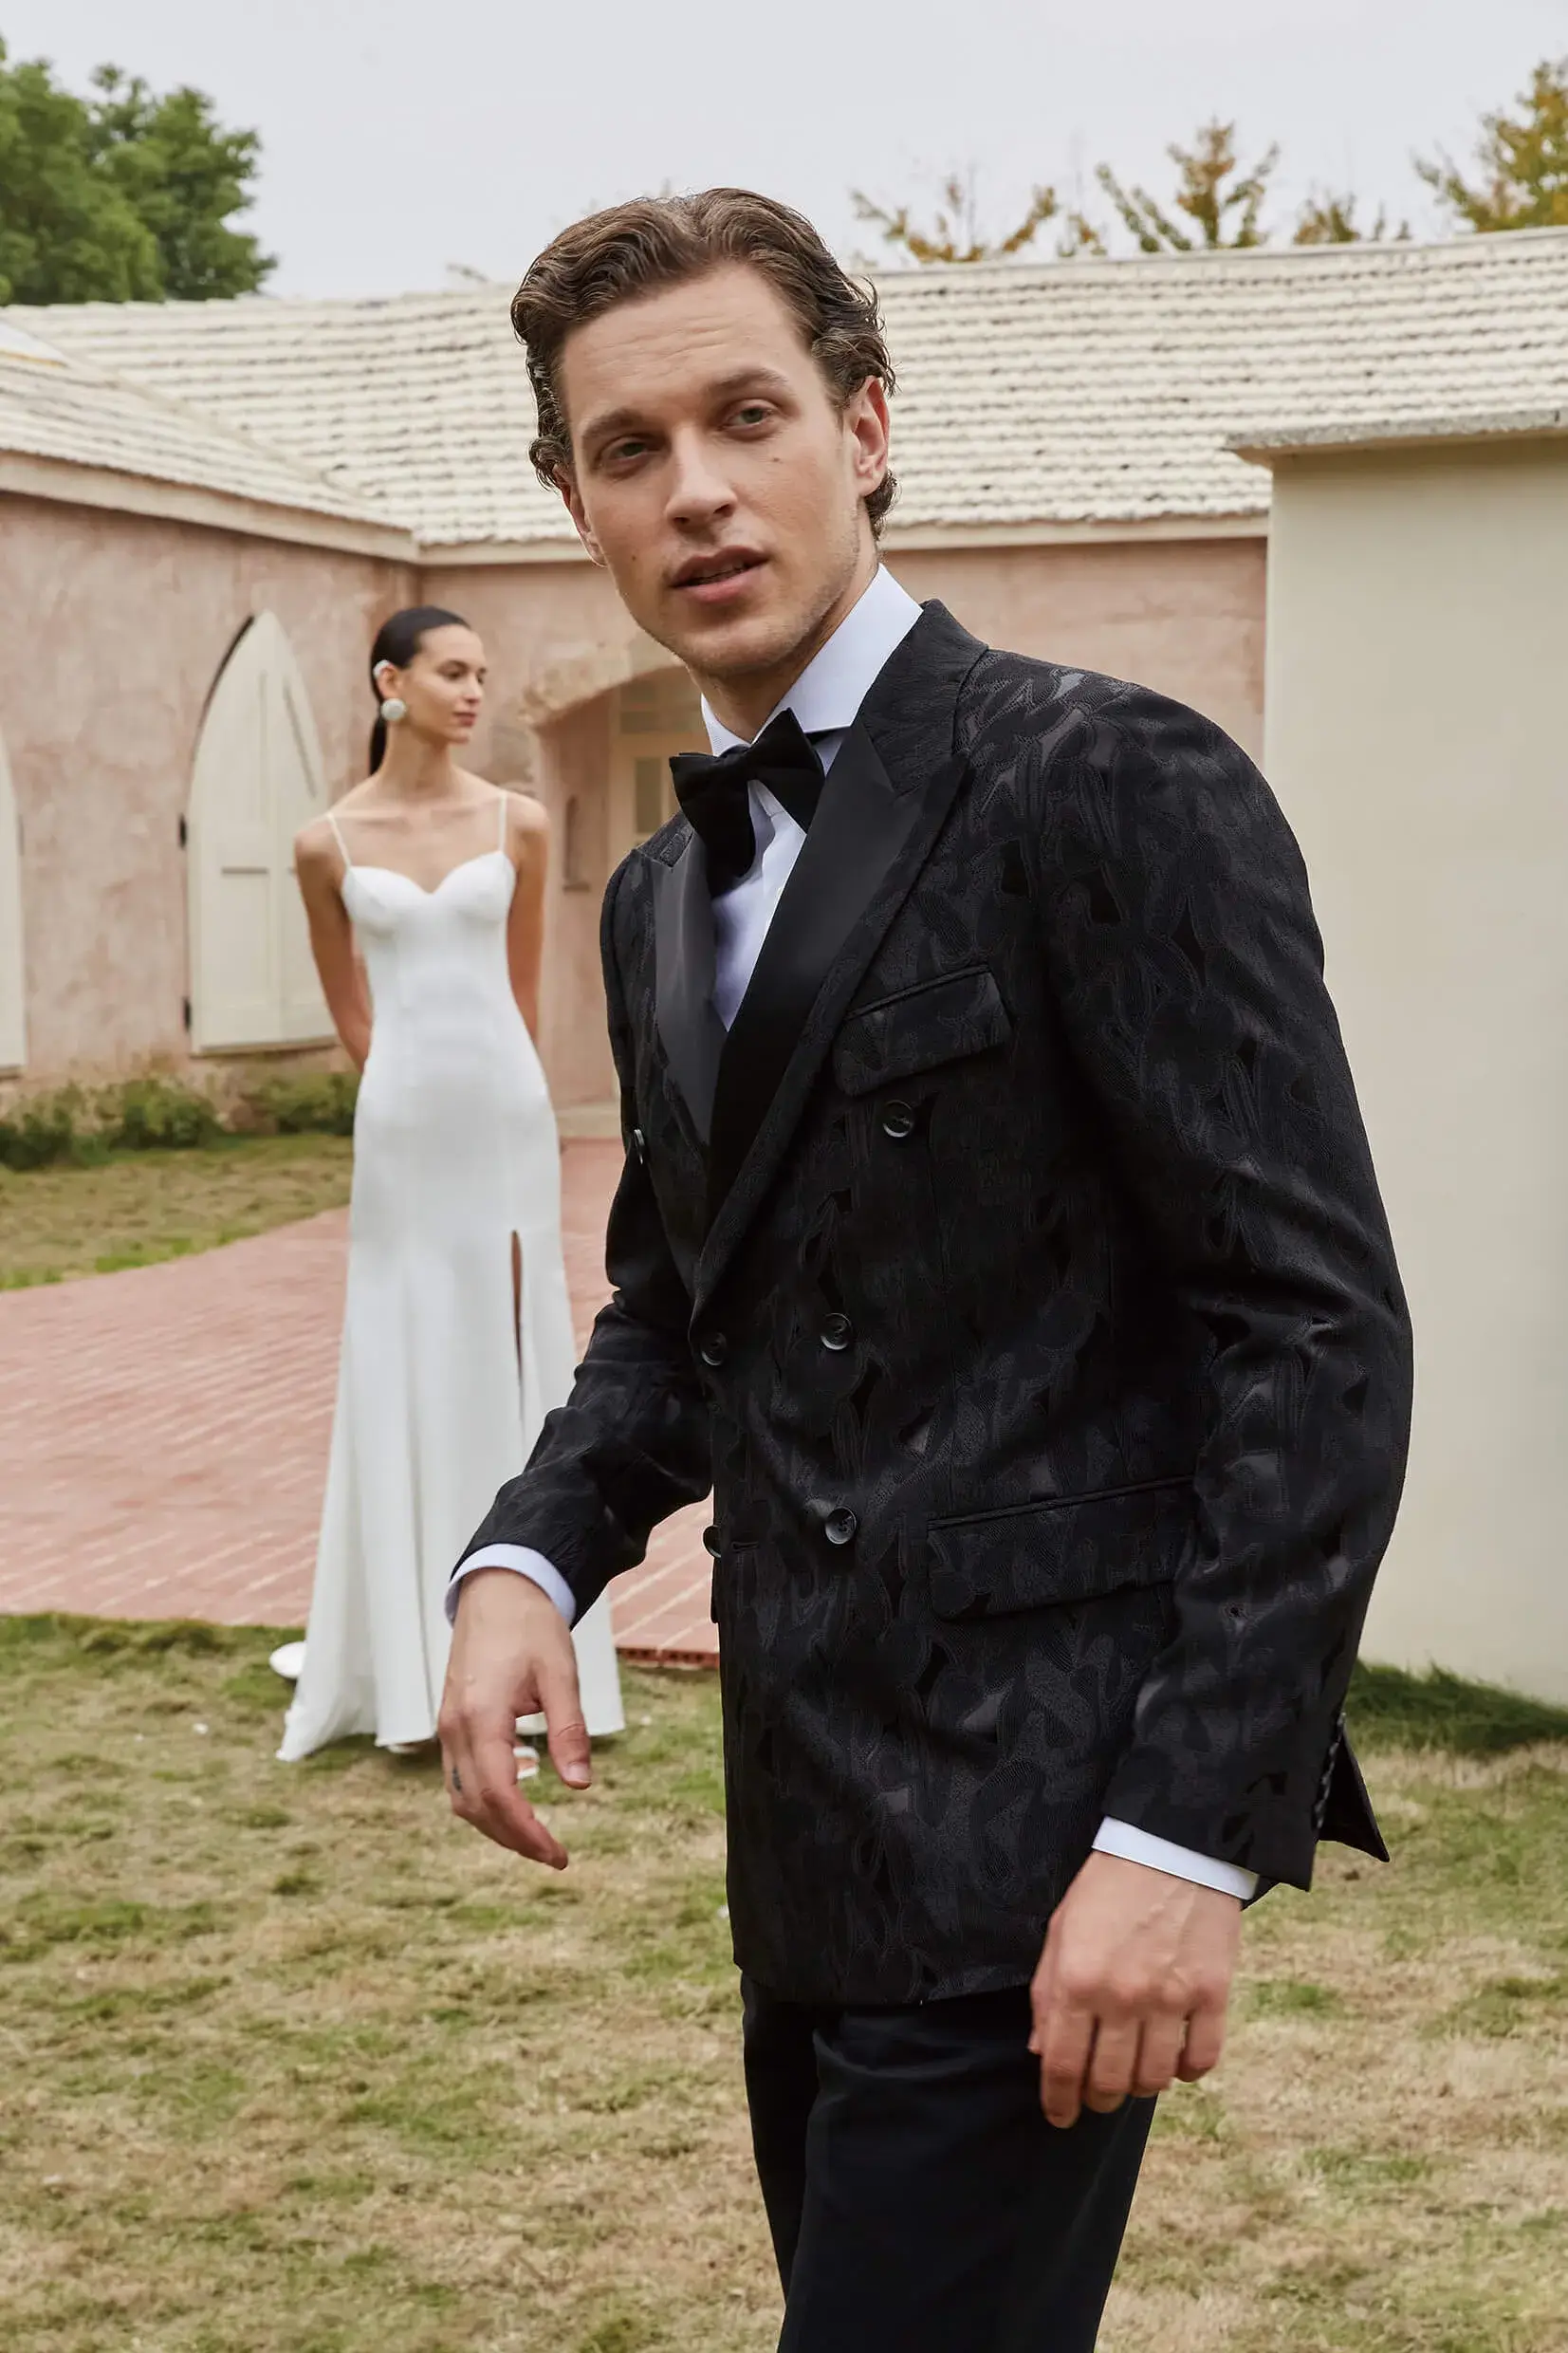 Custom Wedding Tuxedos and Suits